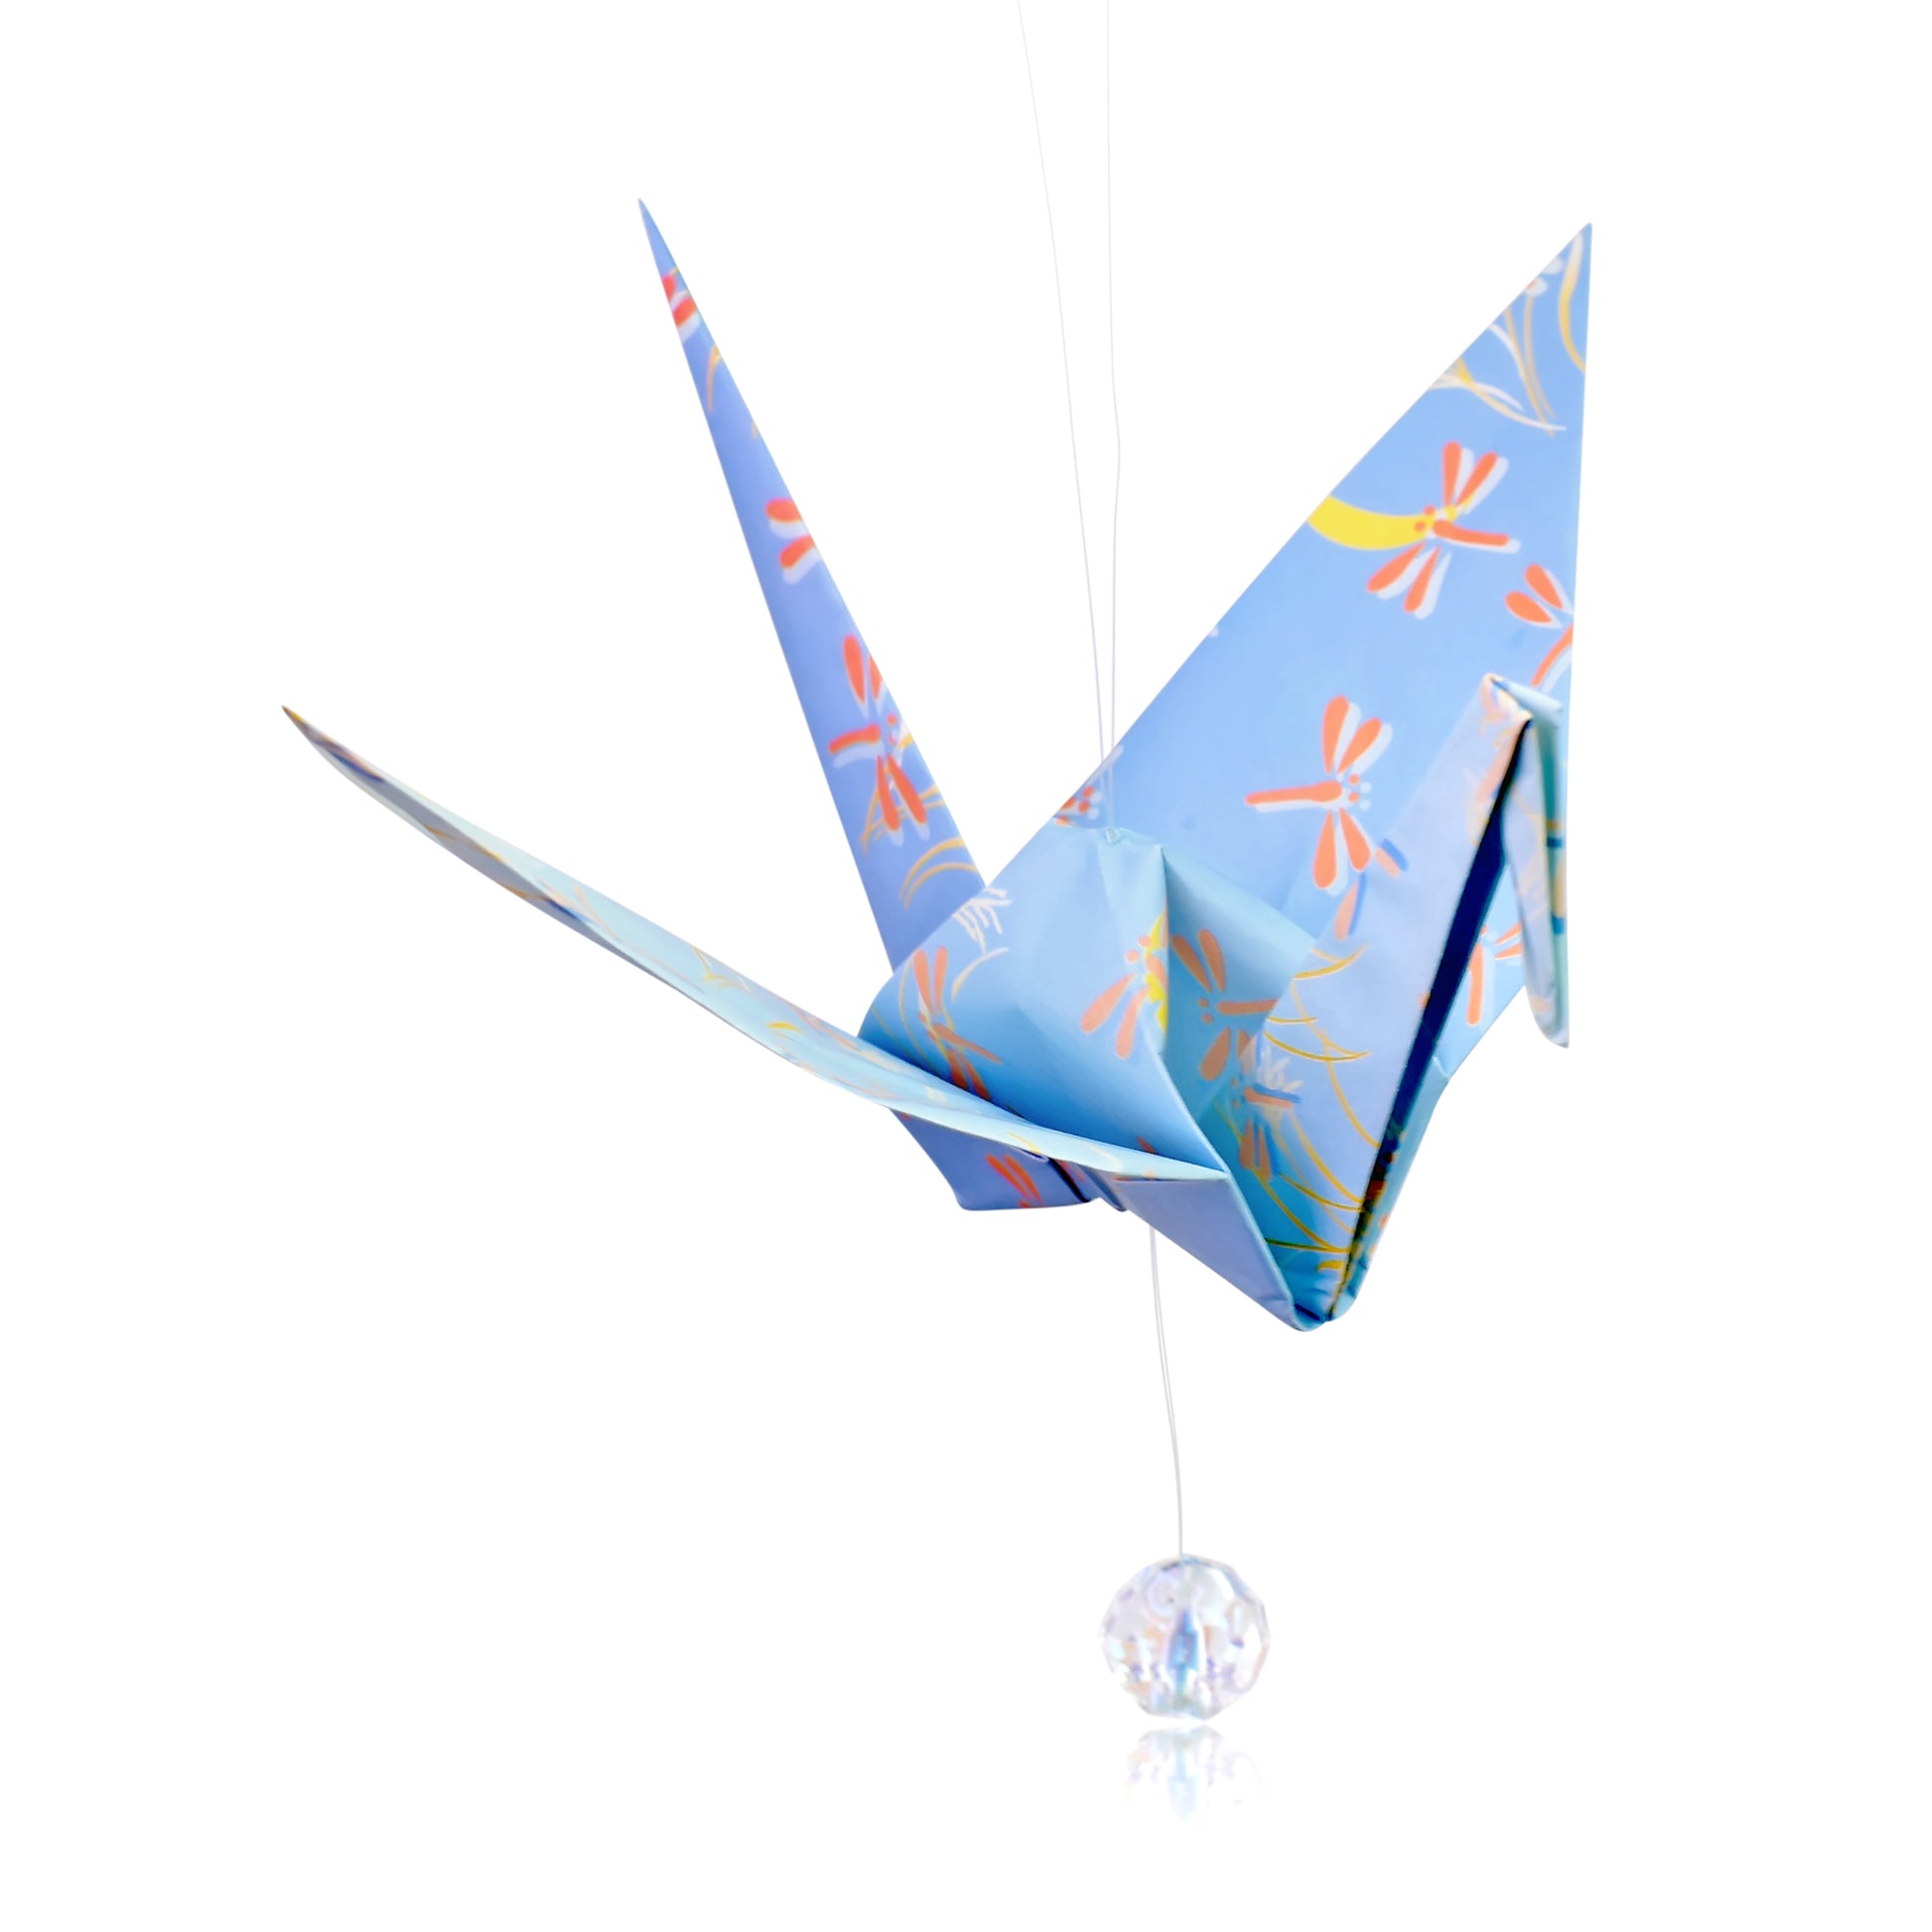 Show You Care with a Gift of April Diamond Birthstone & Origami Cranes